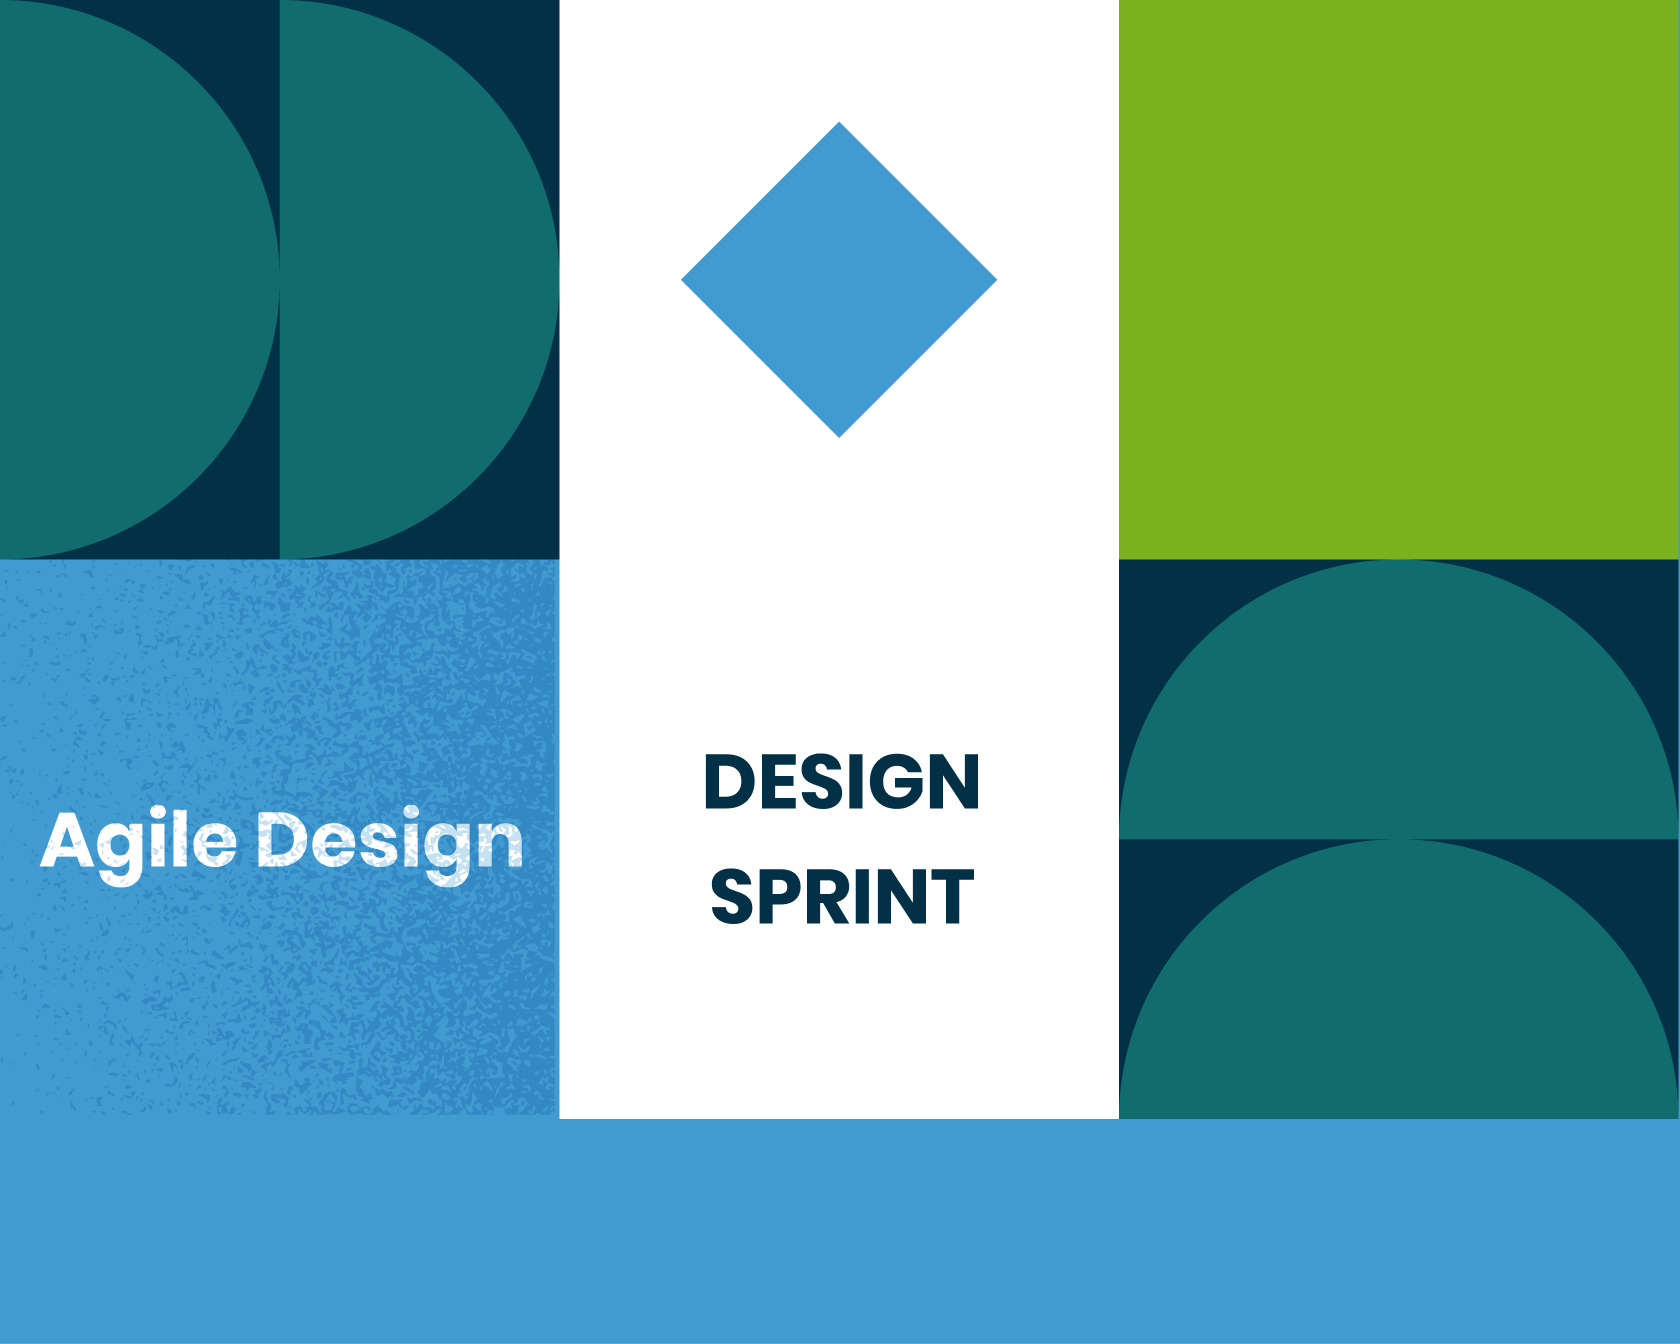 Test phase of the design sprint process